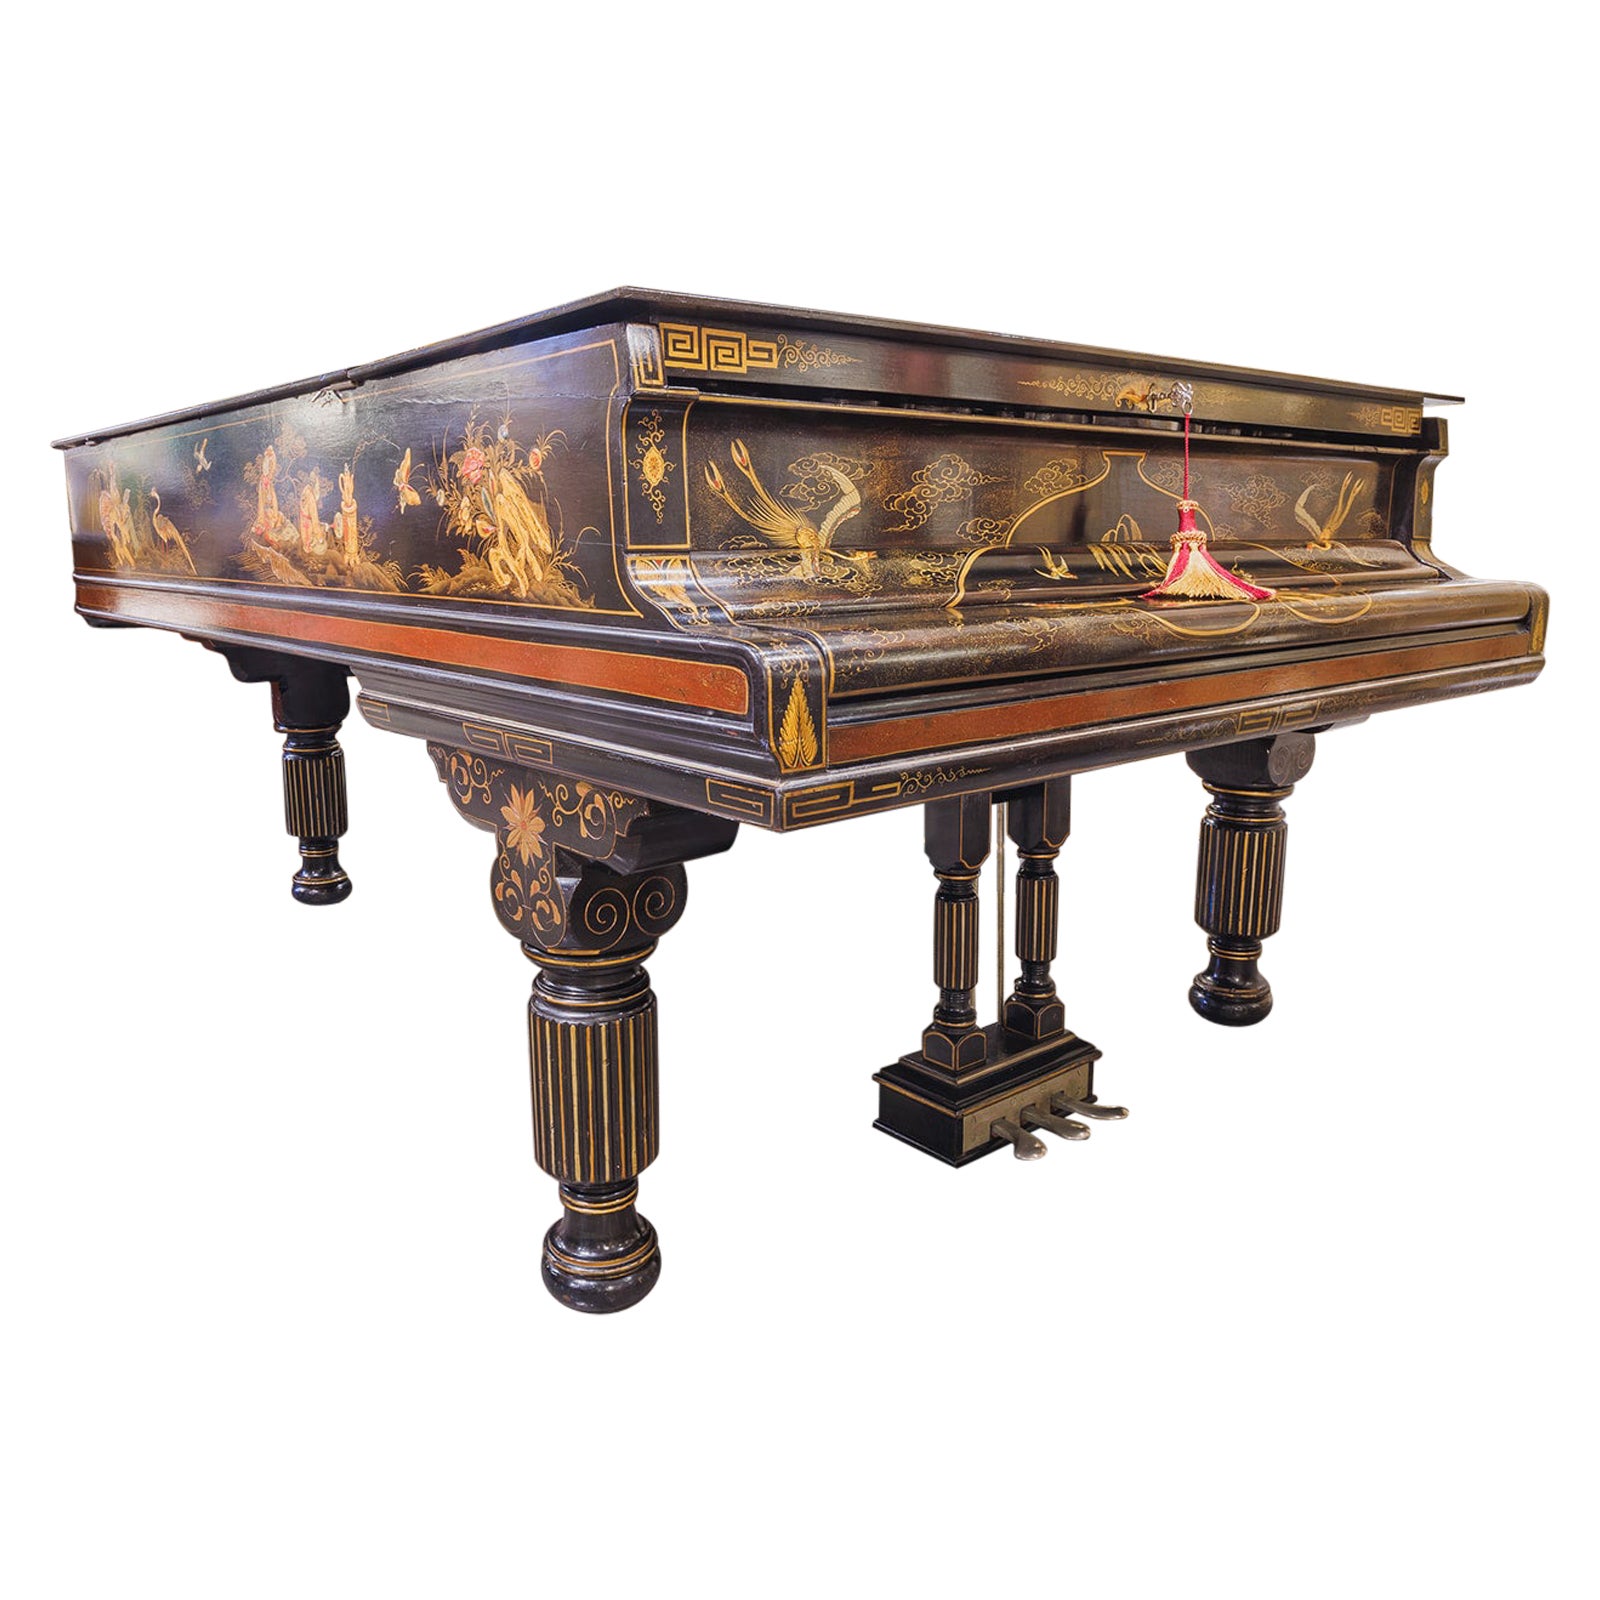 A fine rare 19th c  Steinway grand piano ebonized and Chinoiserie painted scenes